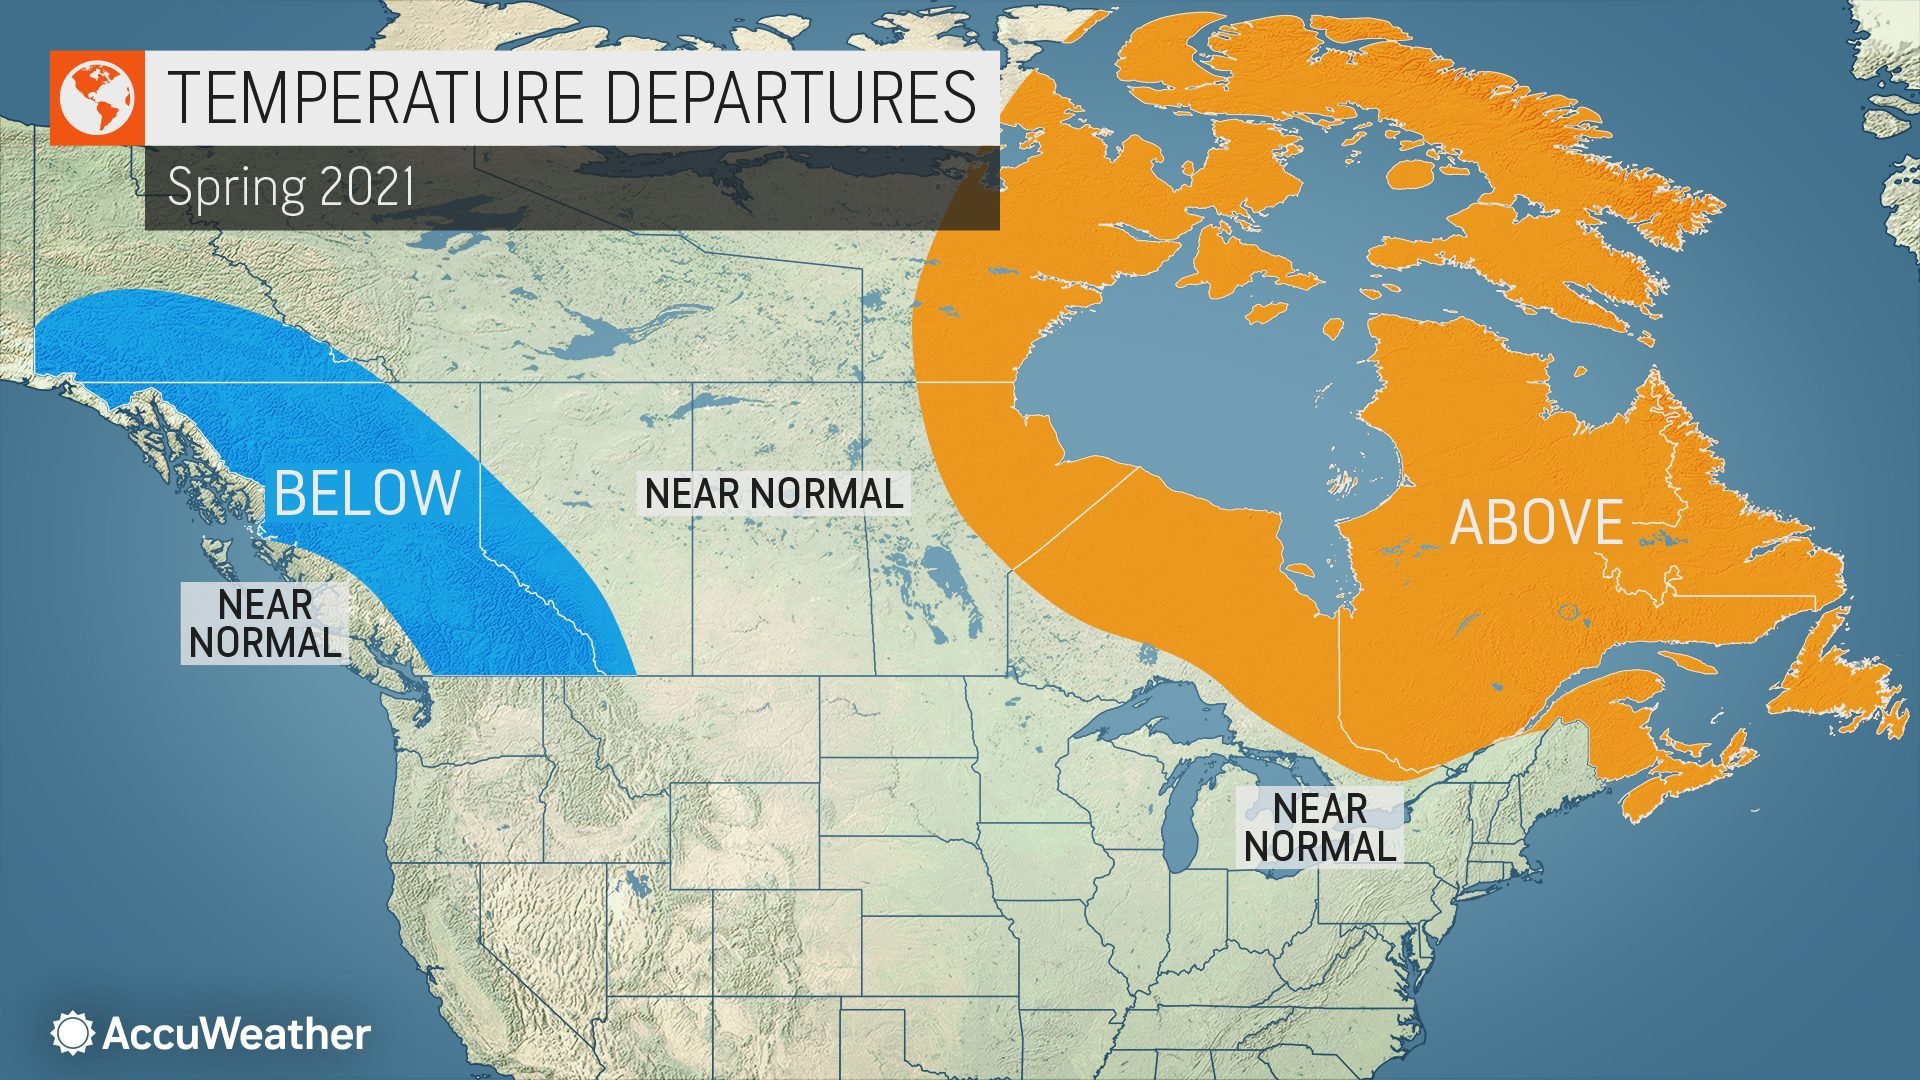 Here’s the Spring Forecast Across Canada, According to AccuWeather